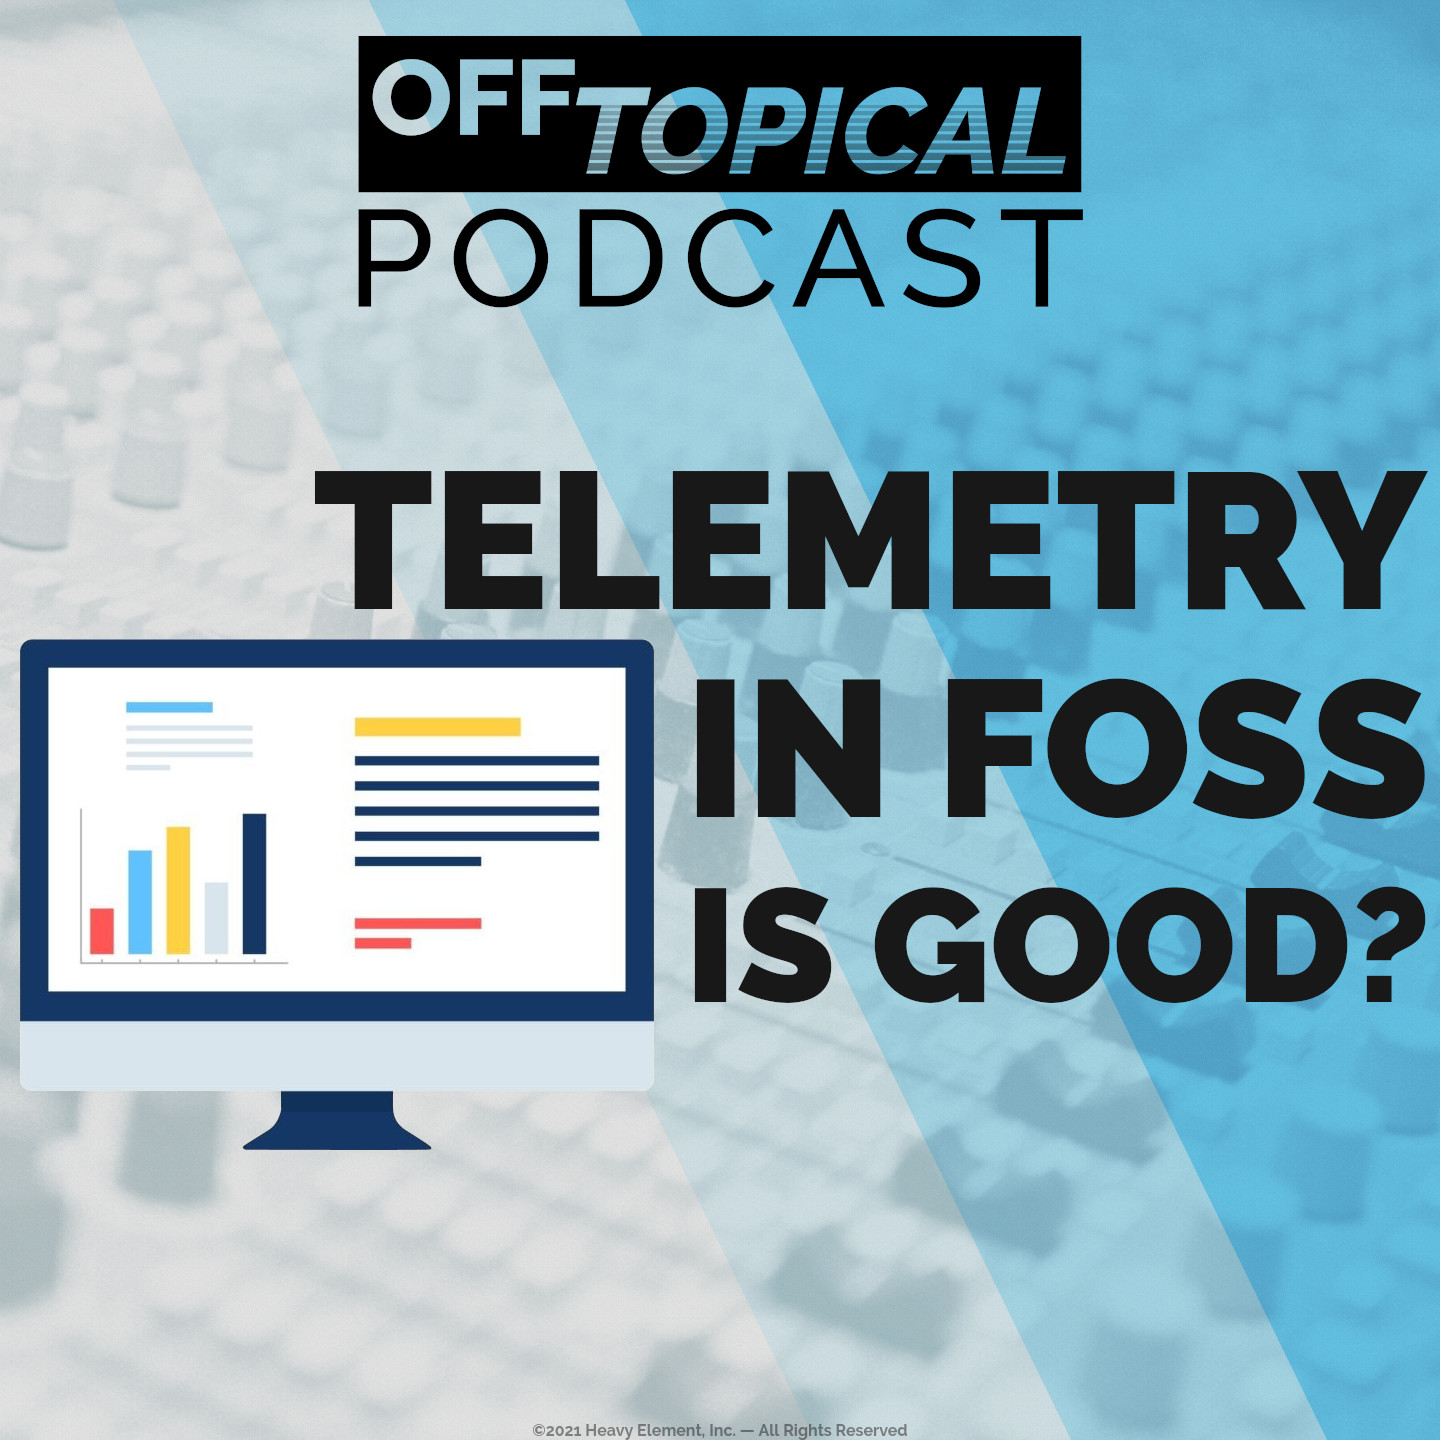 Does FOSS need Telemetry to survive?